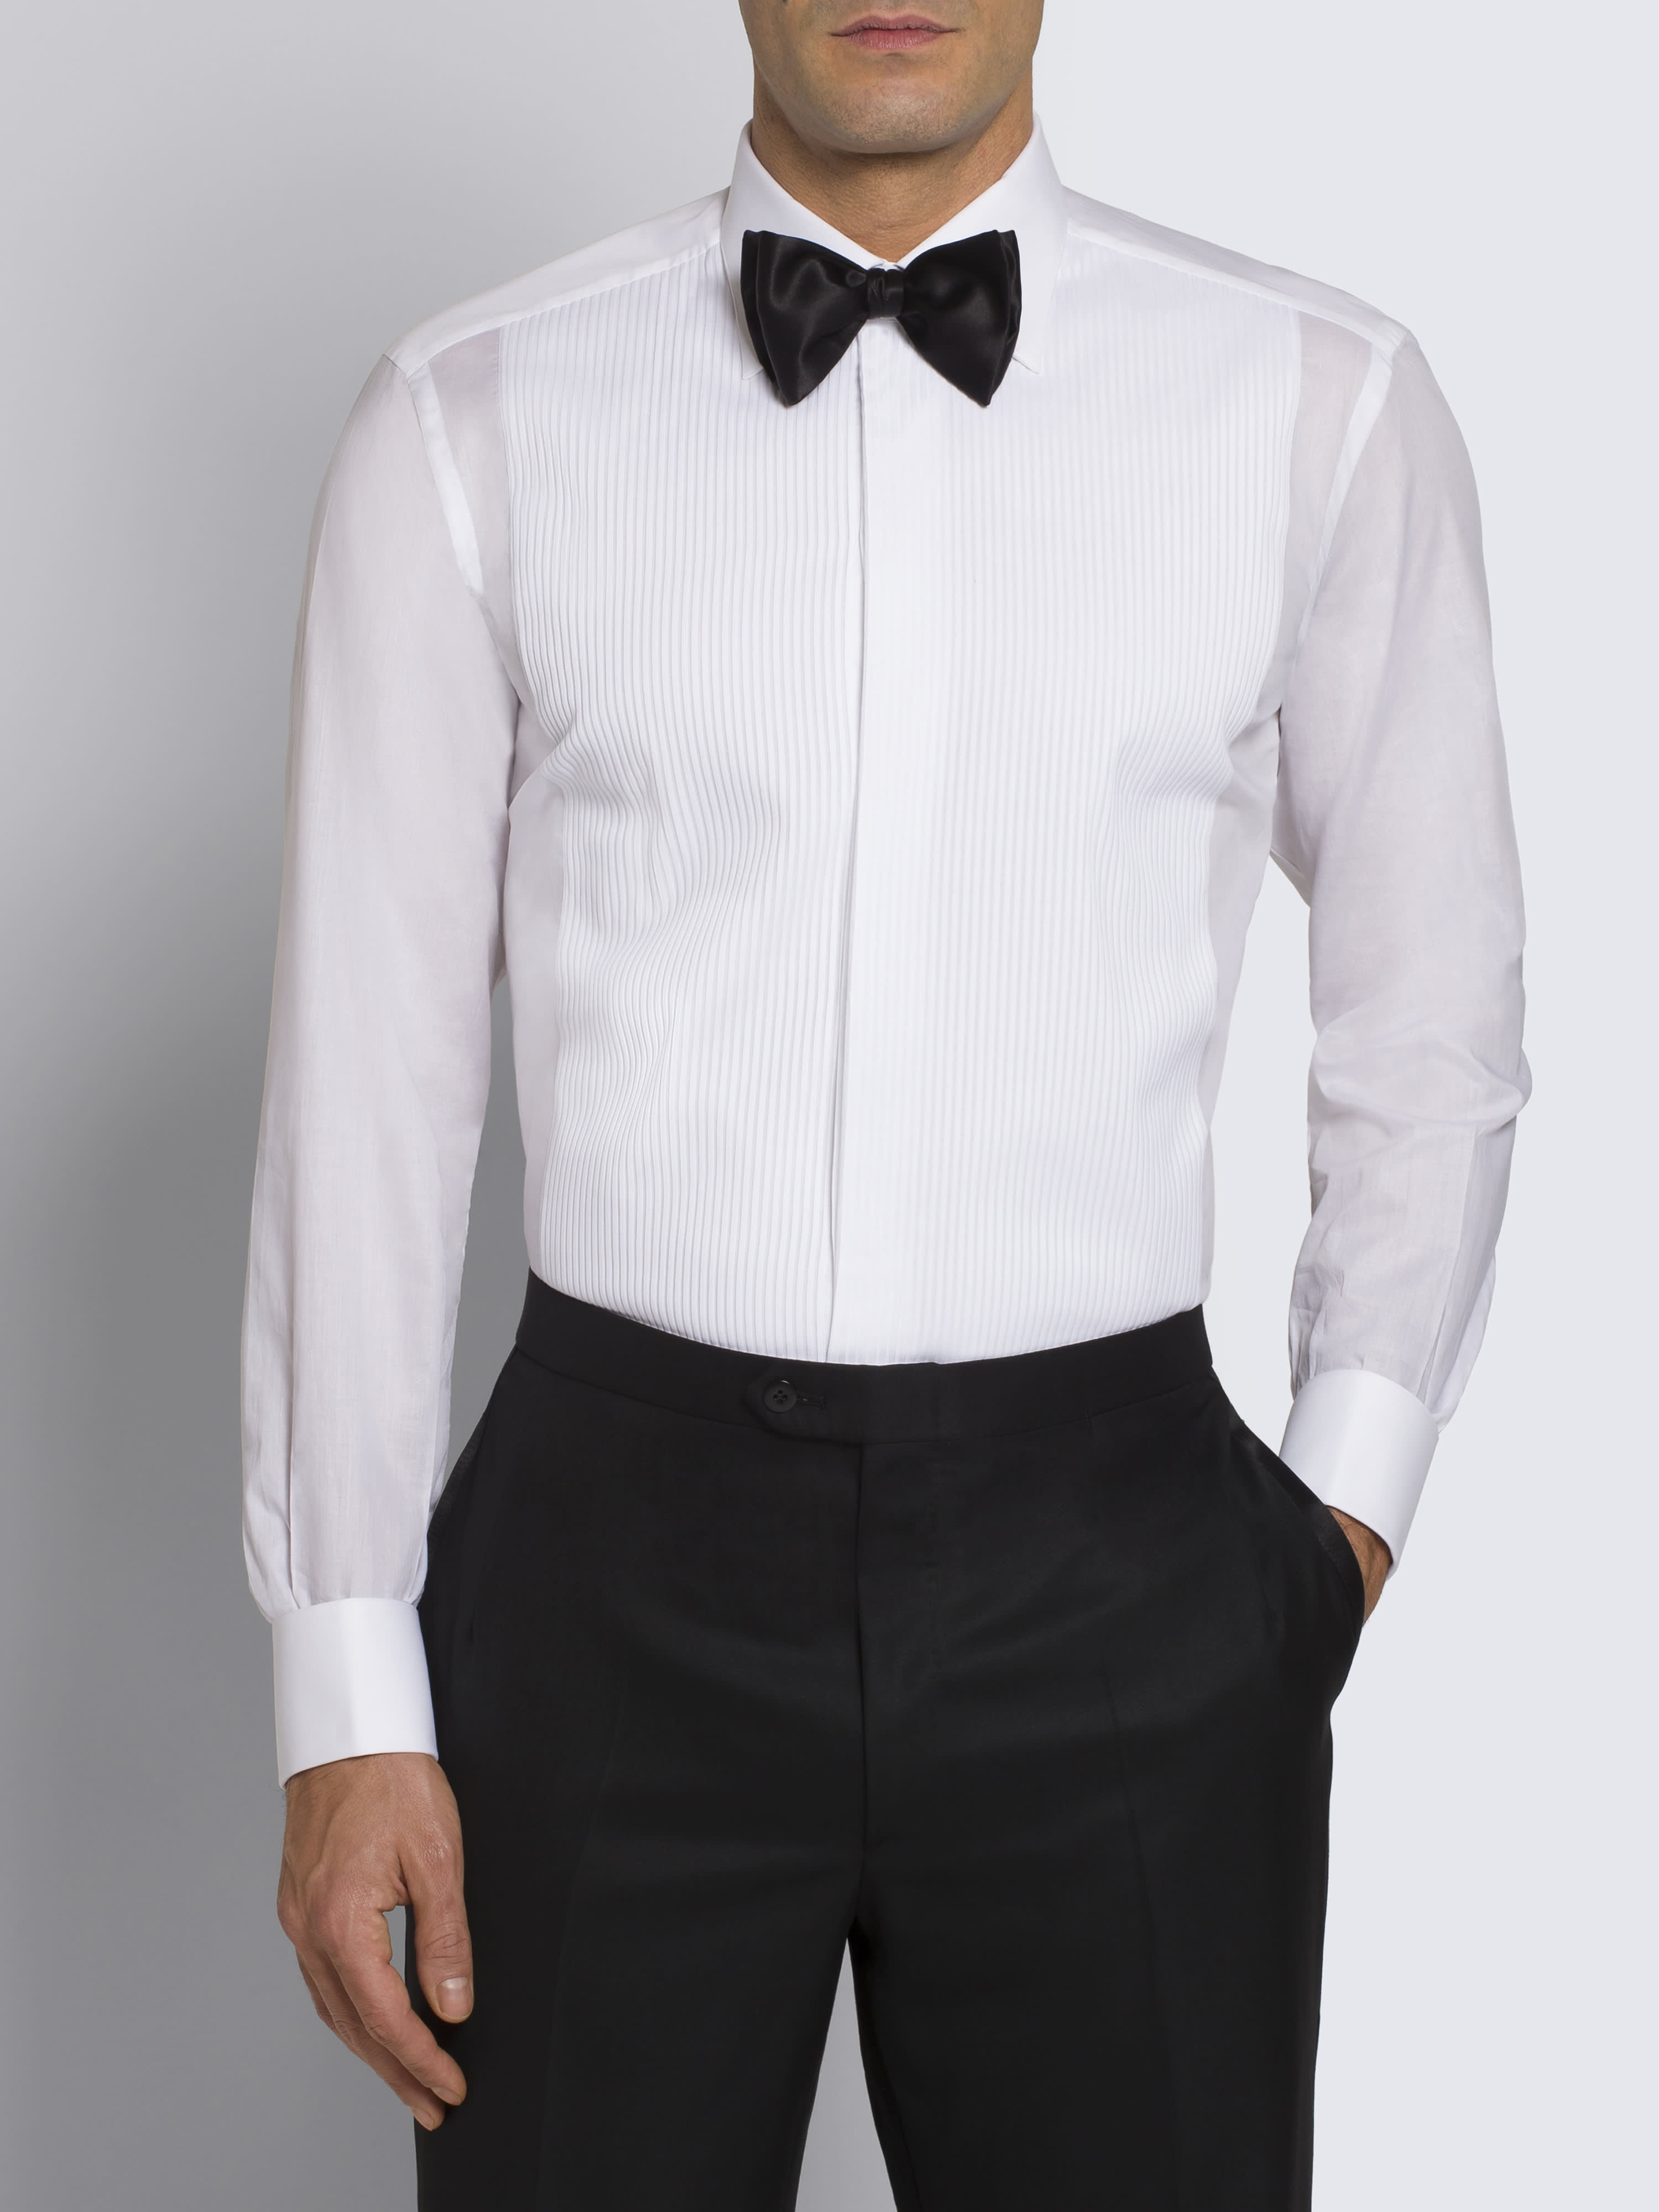 Essential white cotton French cuff evening shirt with plastron | Brioni ...